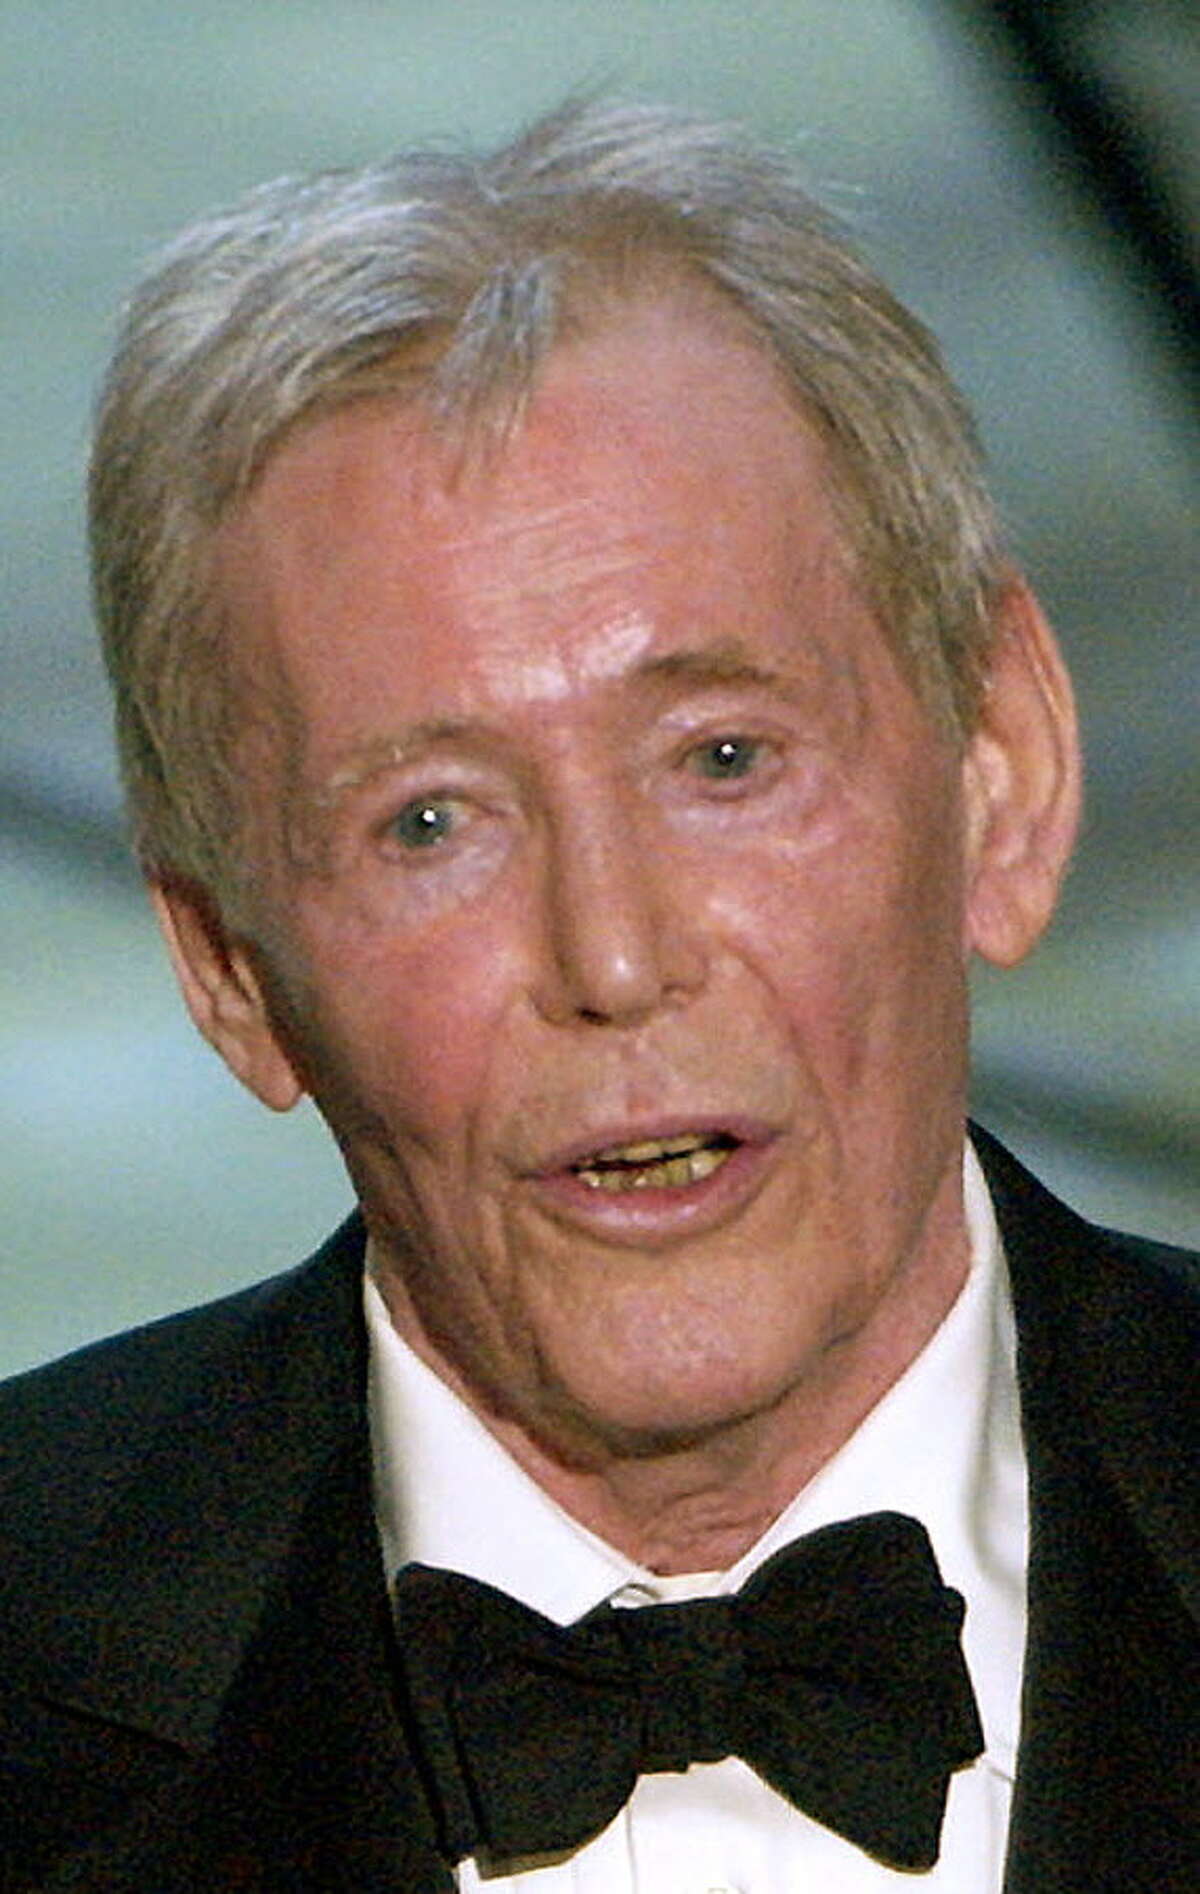 **FILE**Actor Peter O'Toole accepts his honorary Oscar from the Academy of Motion Picture Arts and Sciences during the 75th annual Academy Awards telecast on March 23, 2003, in Los Angeles. O'Toole, a seven-time Oscar nominee, will star in "Lassie," a new adaptation of the 1938 novel "Lassie Come Home" by Eric Knight. Shooting was to begin Monday, May 23, 2005, on location in Ireland and the Isle of Man.(AP Photo/Kevork Djansezian)